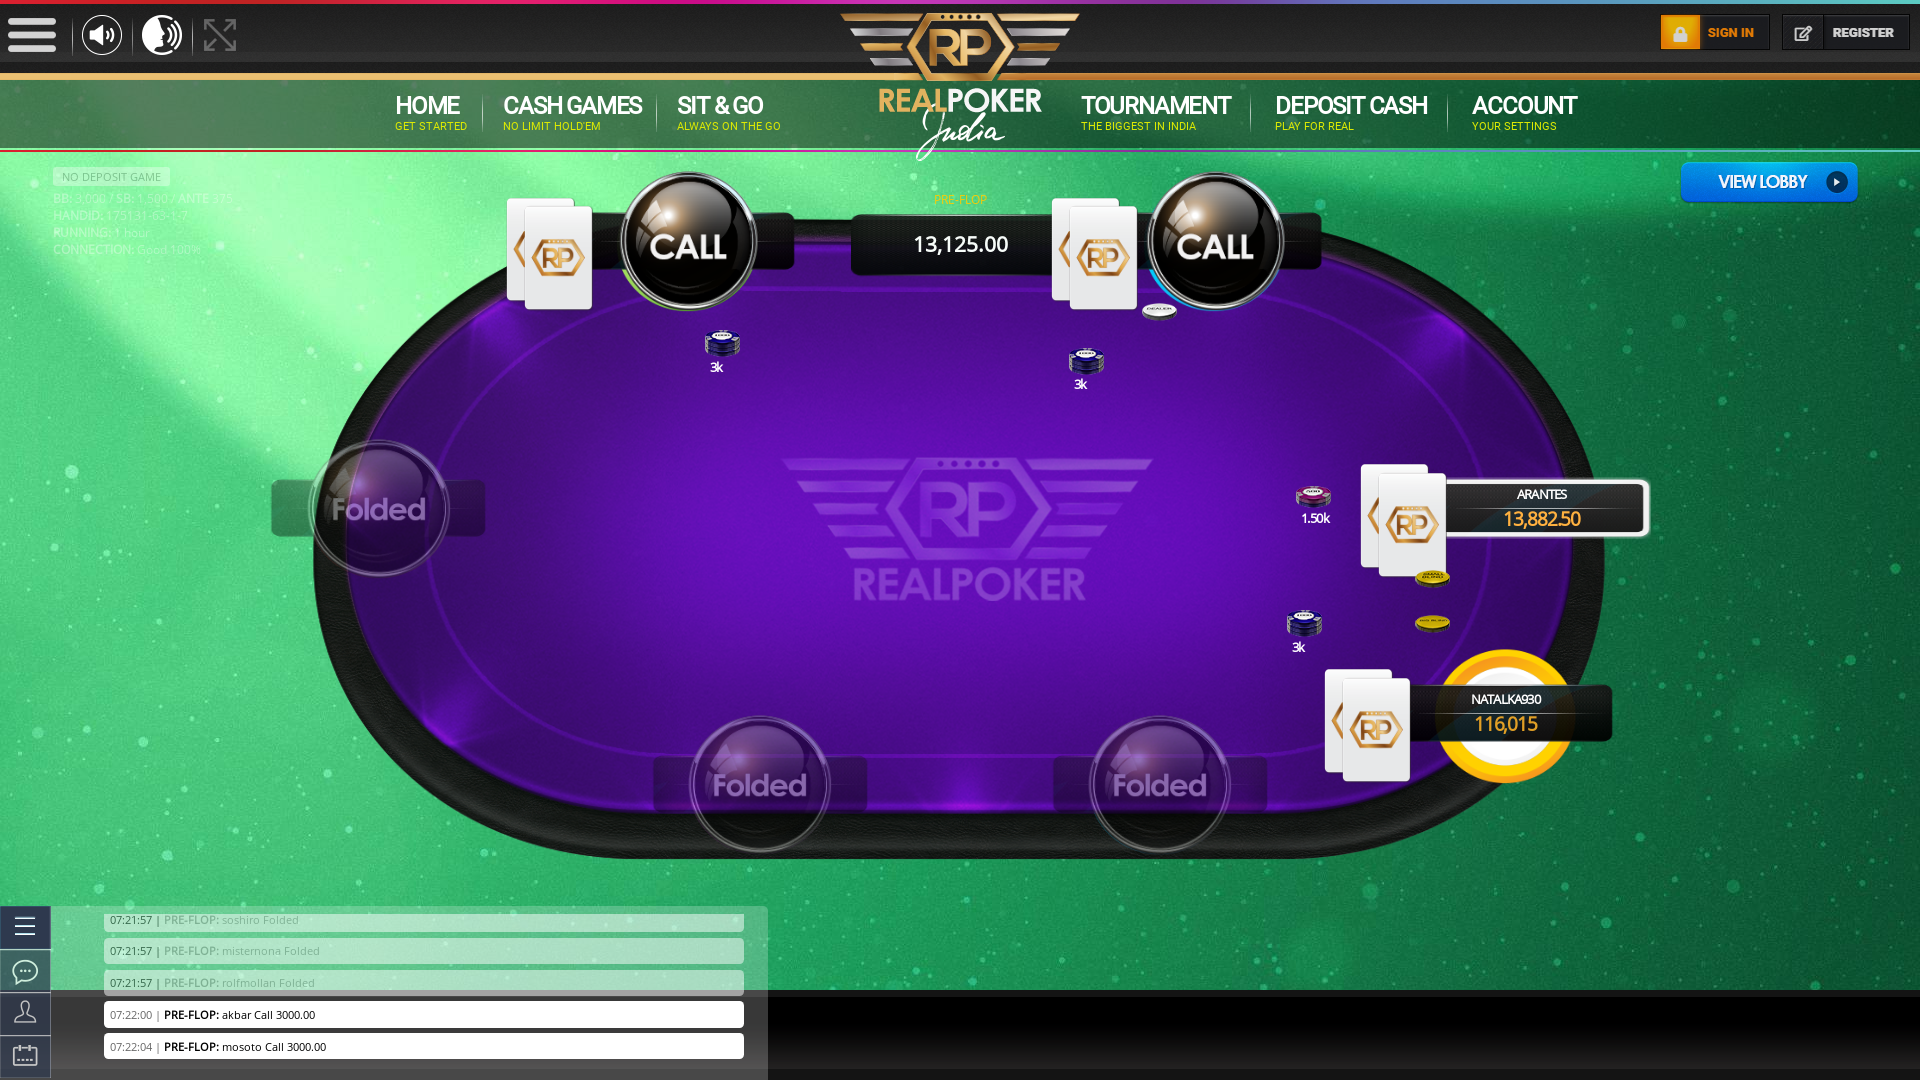 Real poker on a 10 player table in the 70th minute of the game